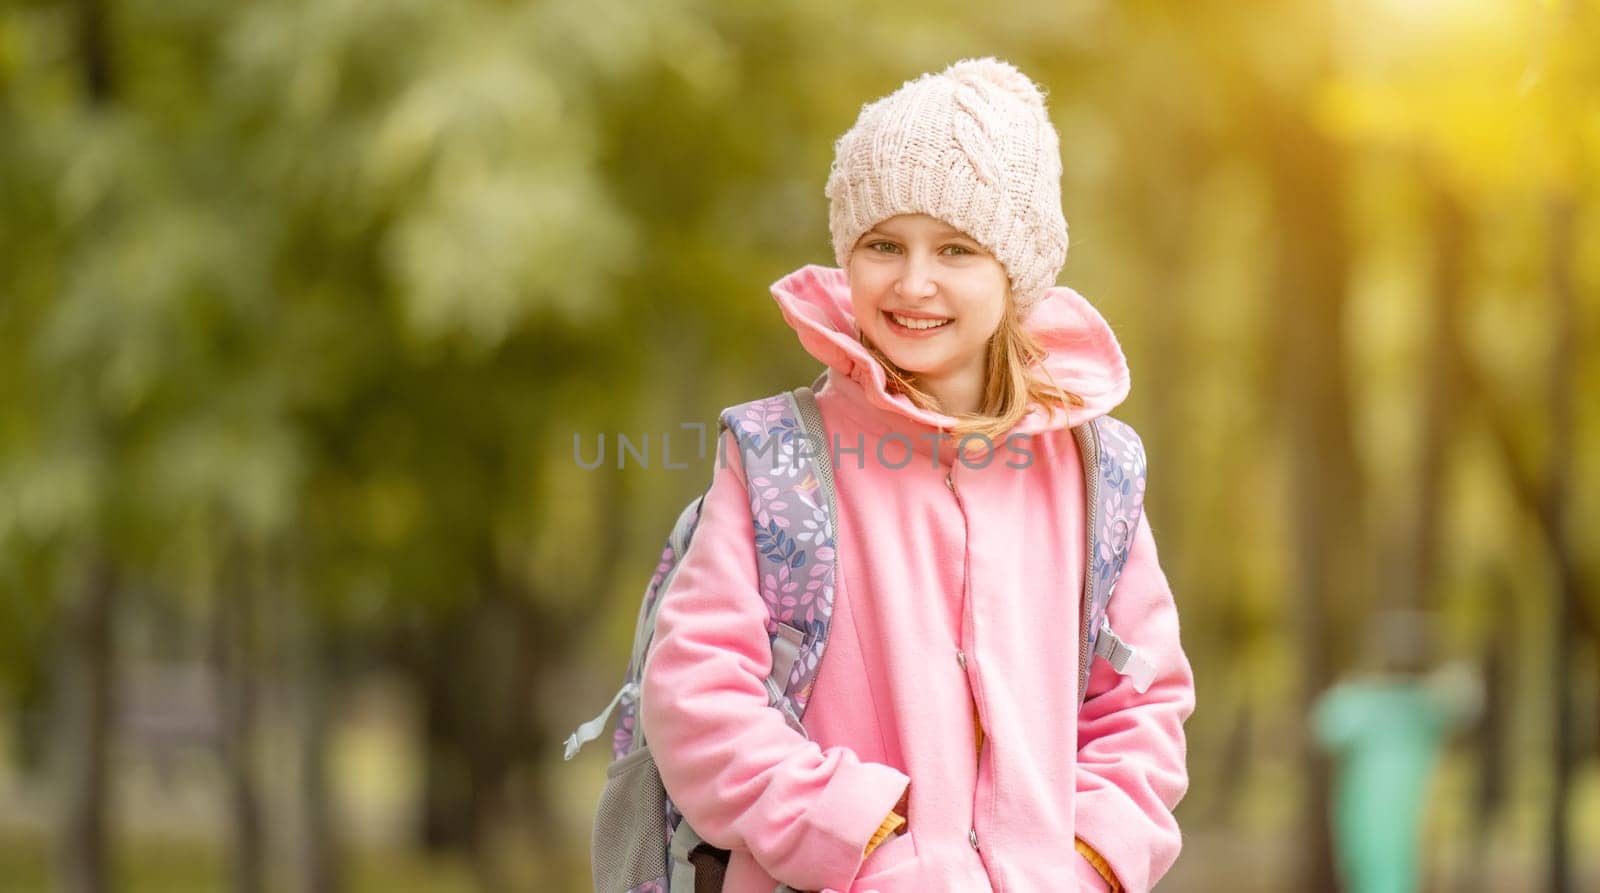 School girl with backpack smiling at autumn park and looking at camera. Preteen child portrait at street oudoors